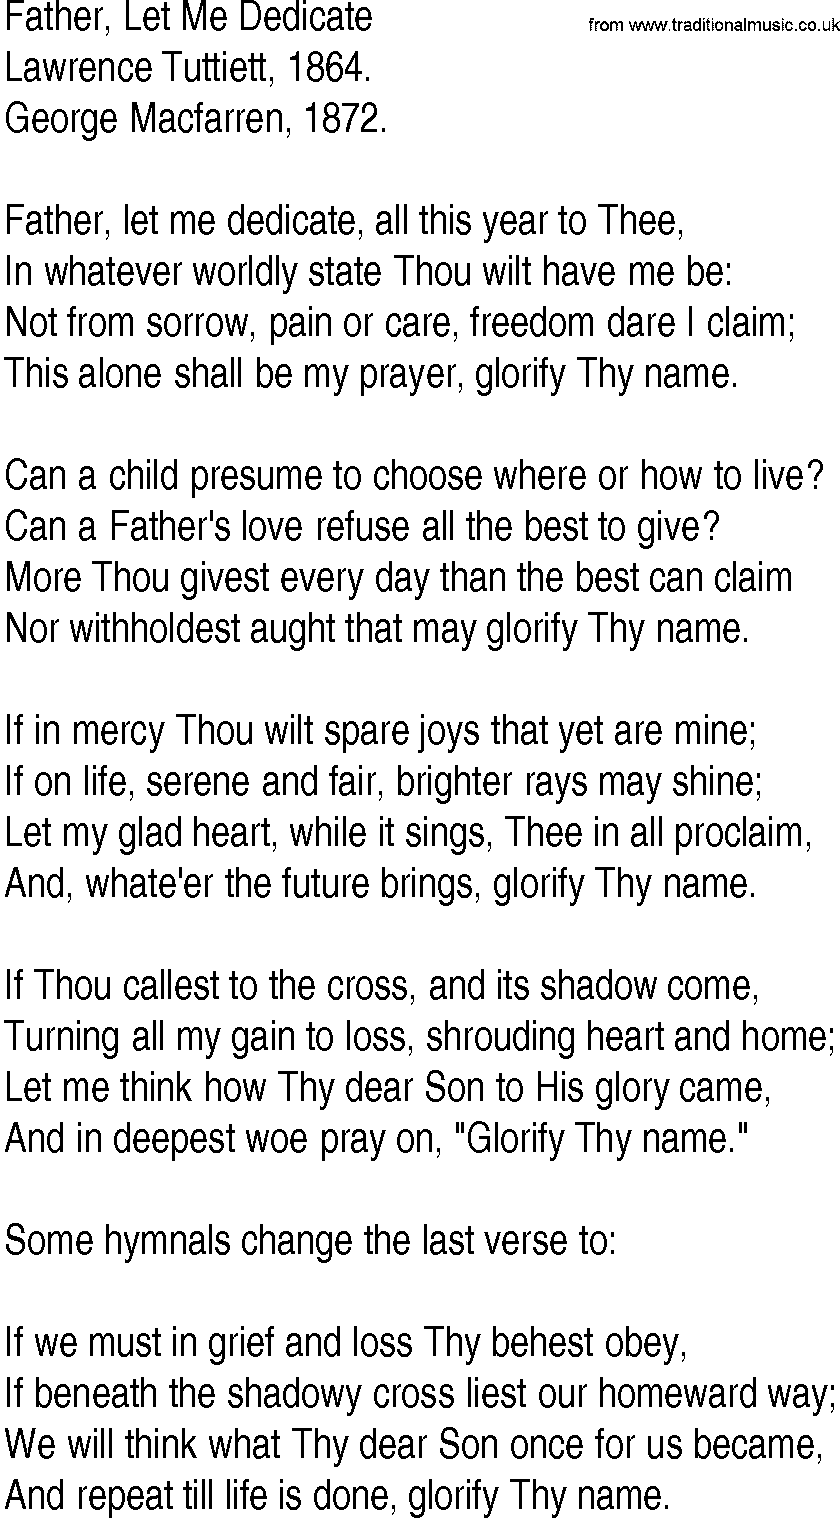 Hymn and Gospel Song: Father, Let Me Dedicate by Lawrence Tuttiett lyrics